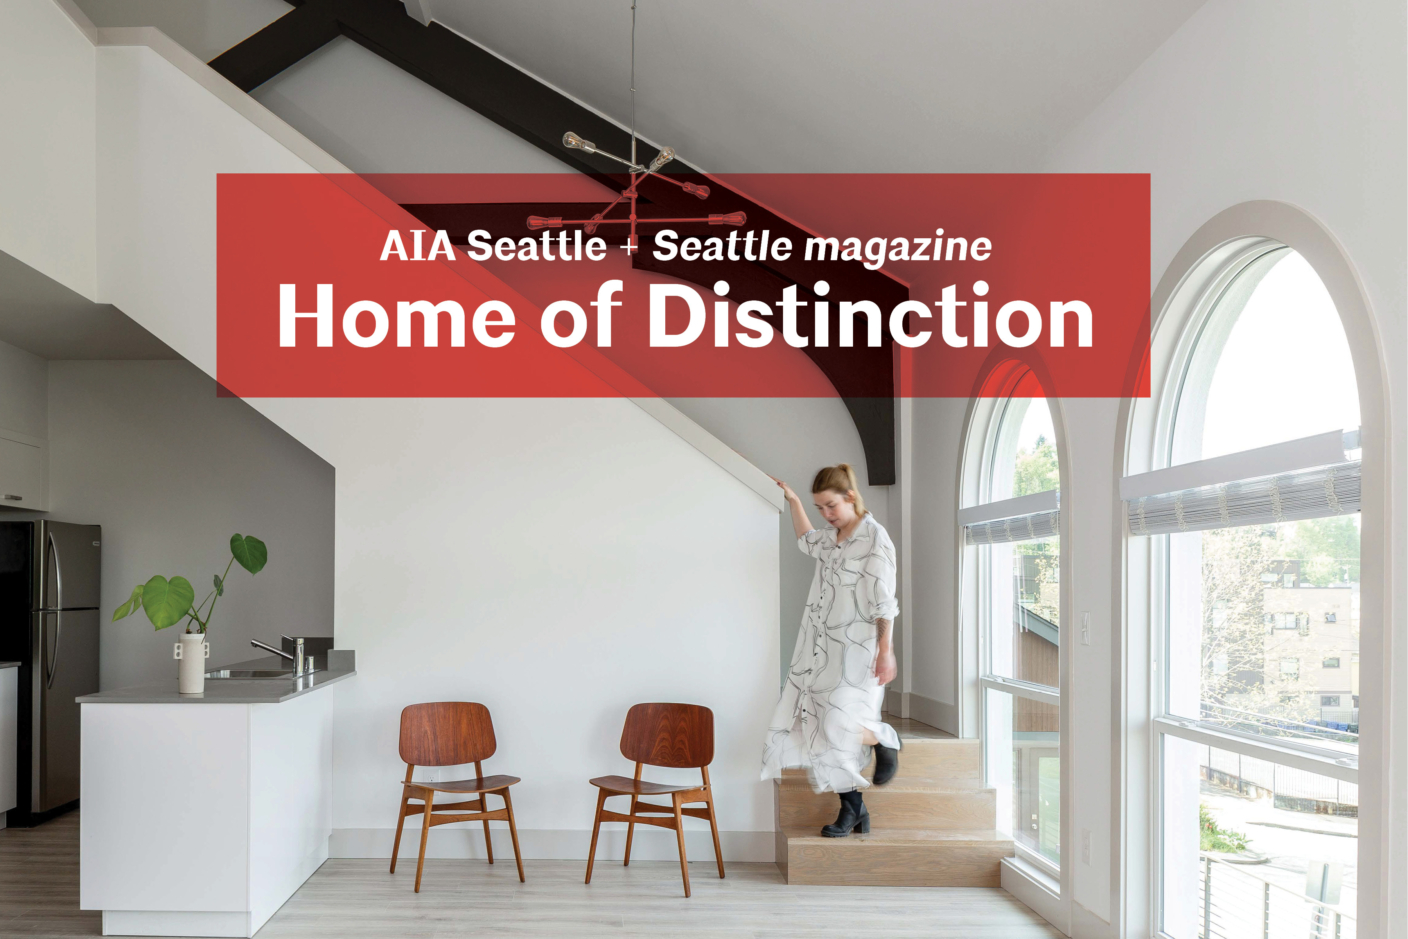 AIA Seattle partners with Seattle magazine to highlight exceptional residential design solutions.